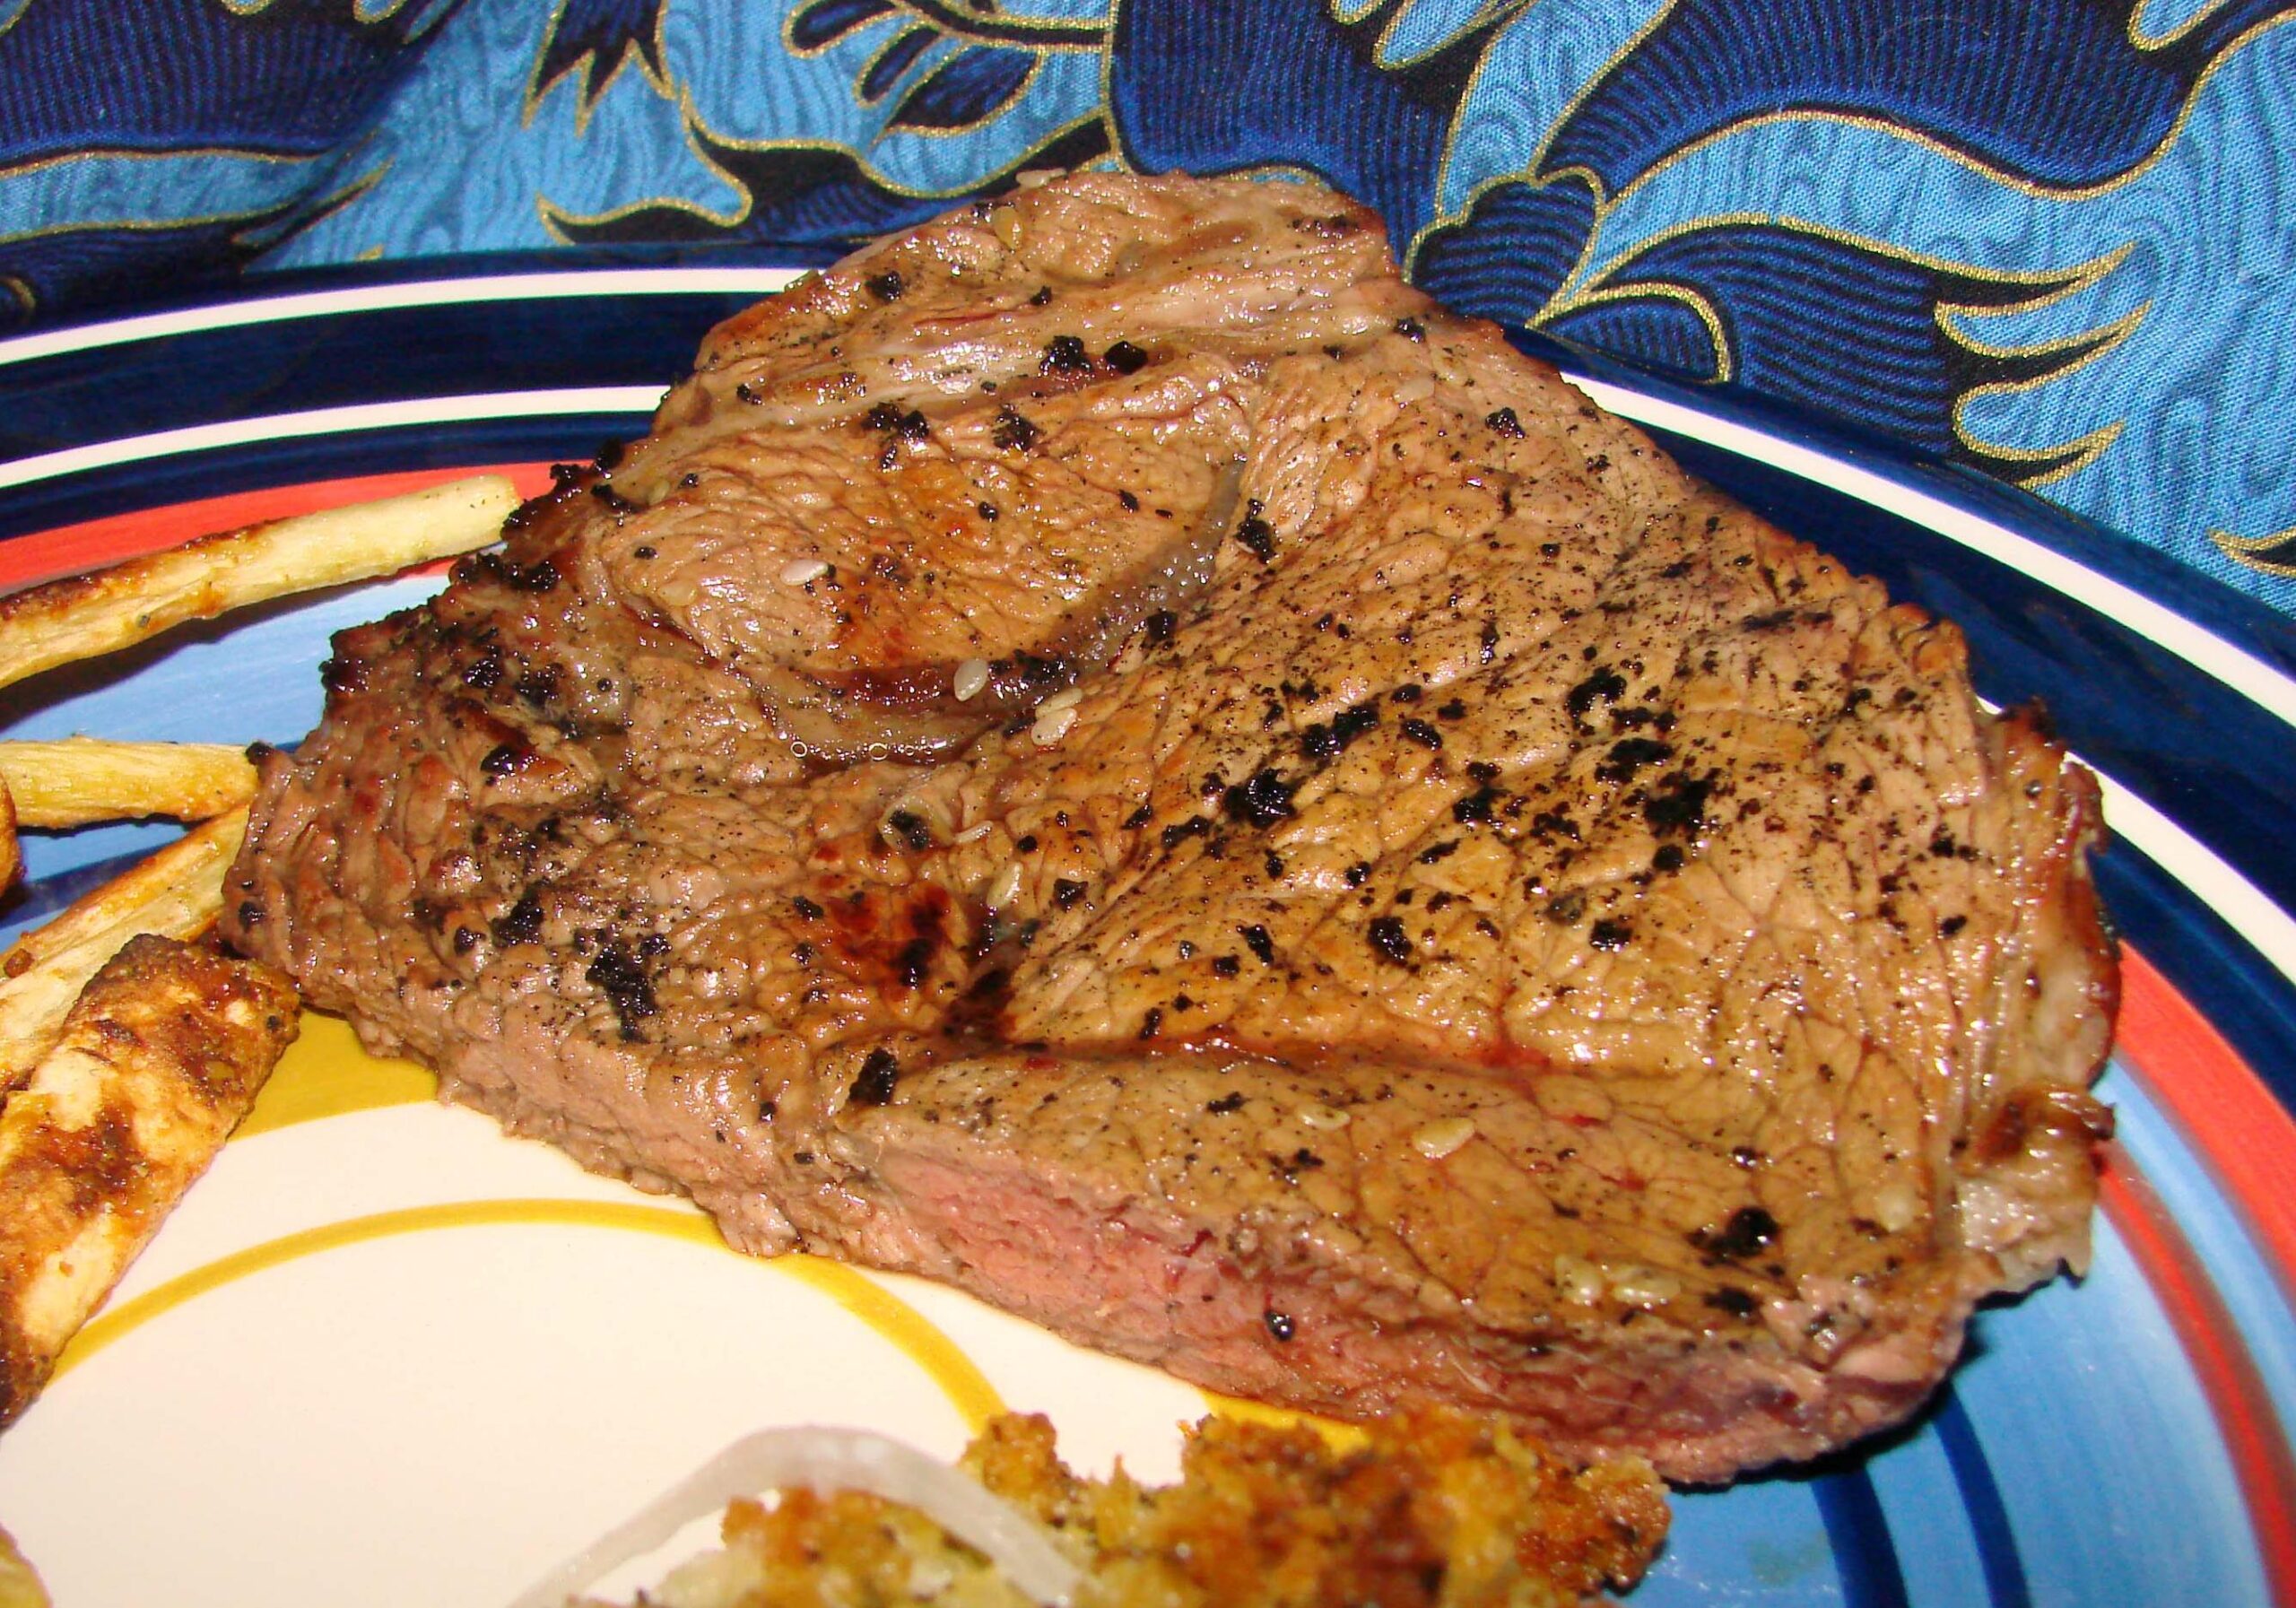  Who needs a cup of coffee when you can have coffee-infused steak?